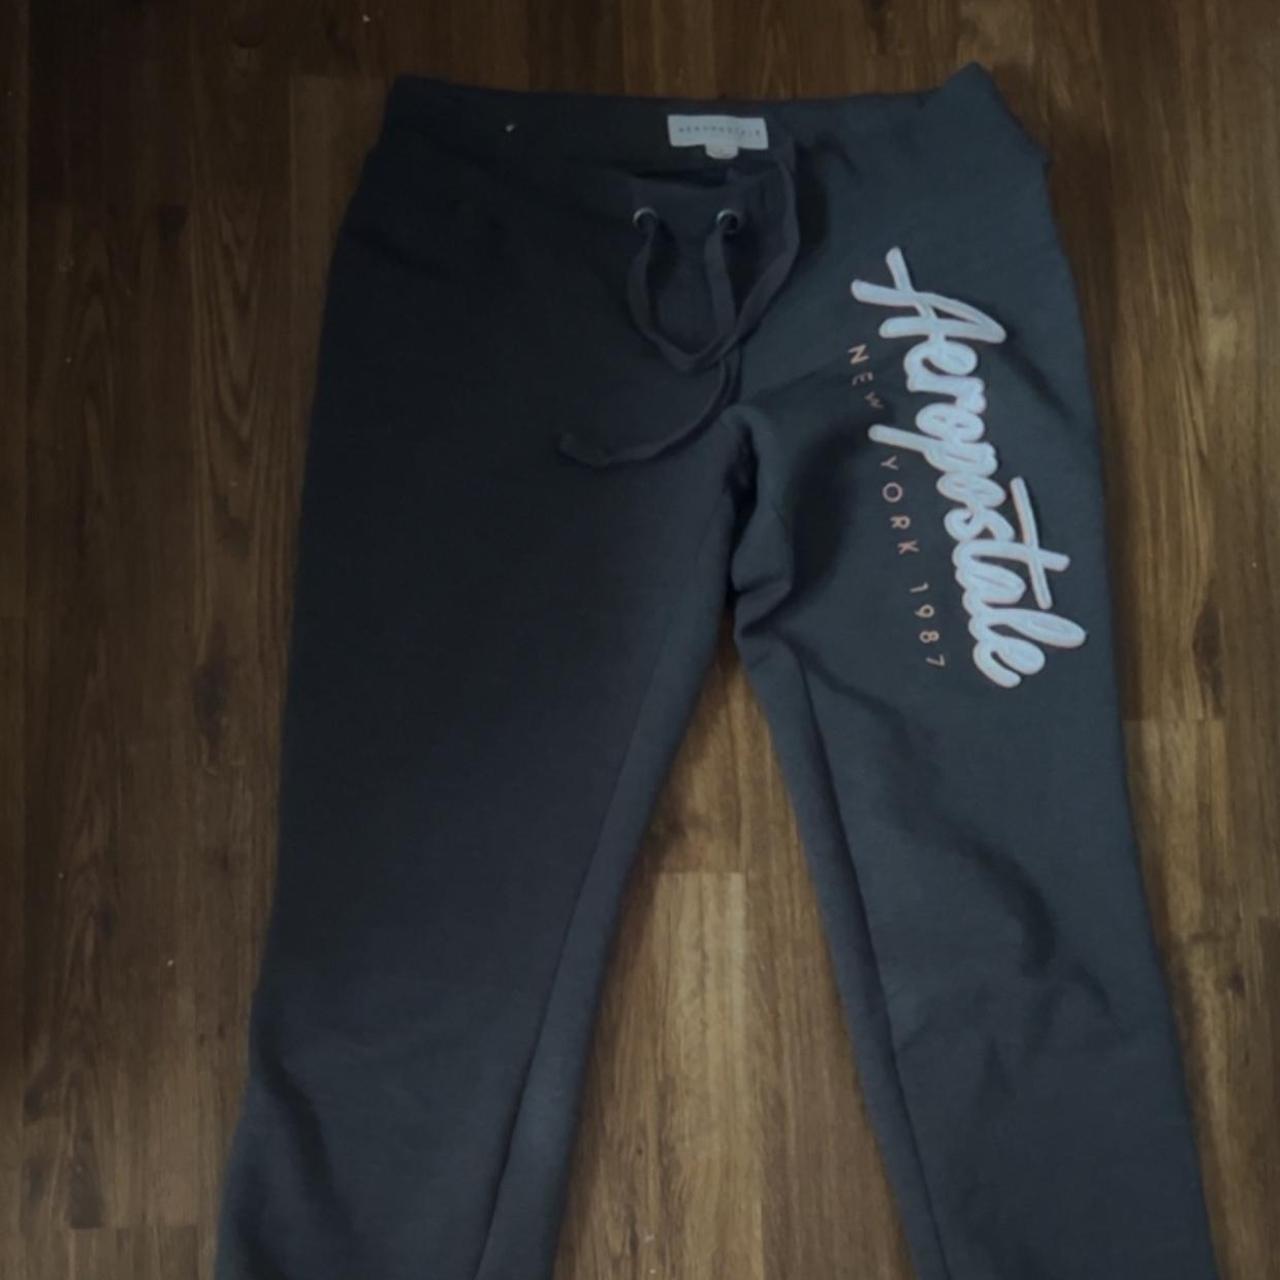 AEROPOSTALE FLARE SWEATPANTS GOOD FOR PEOPLE WHO ARE... - Depop